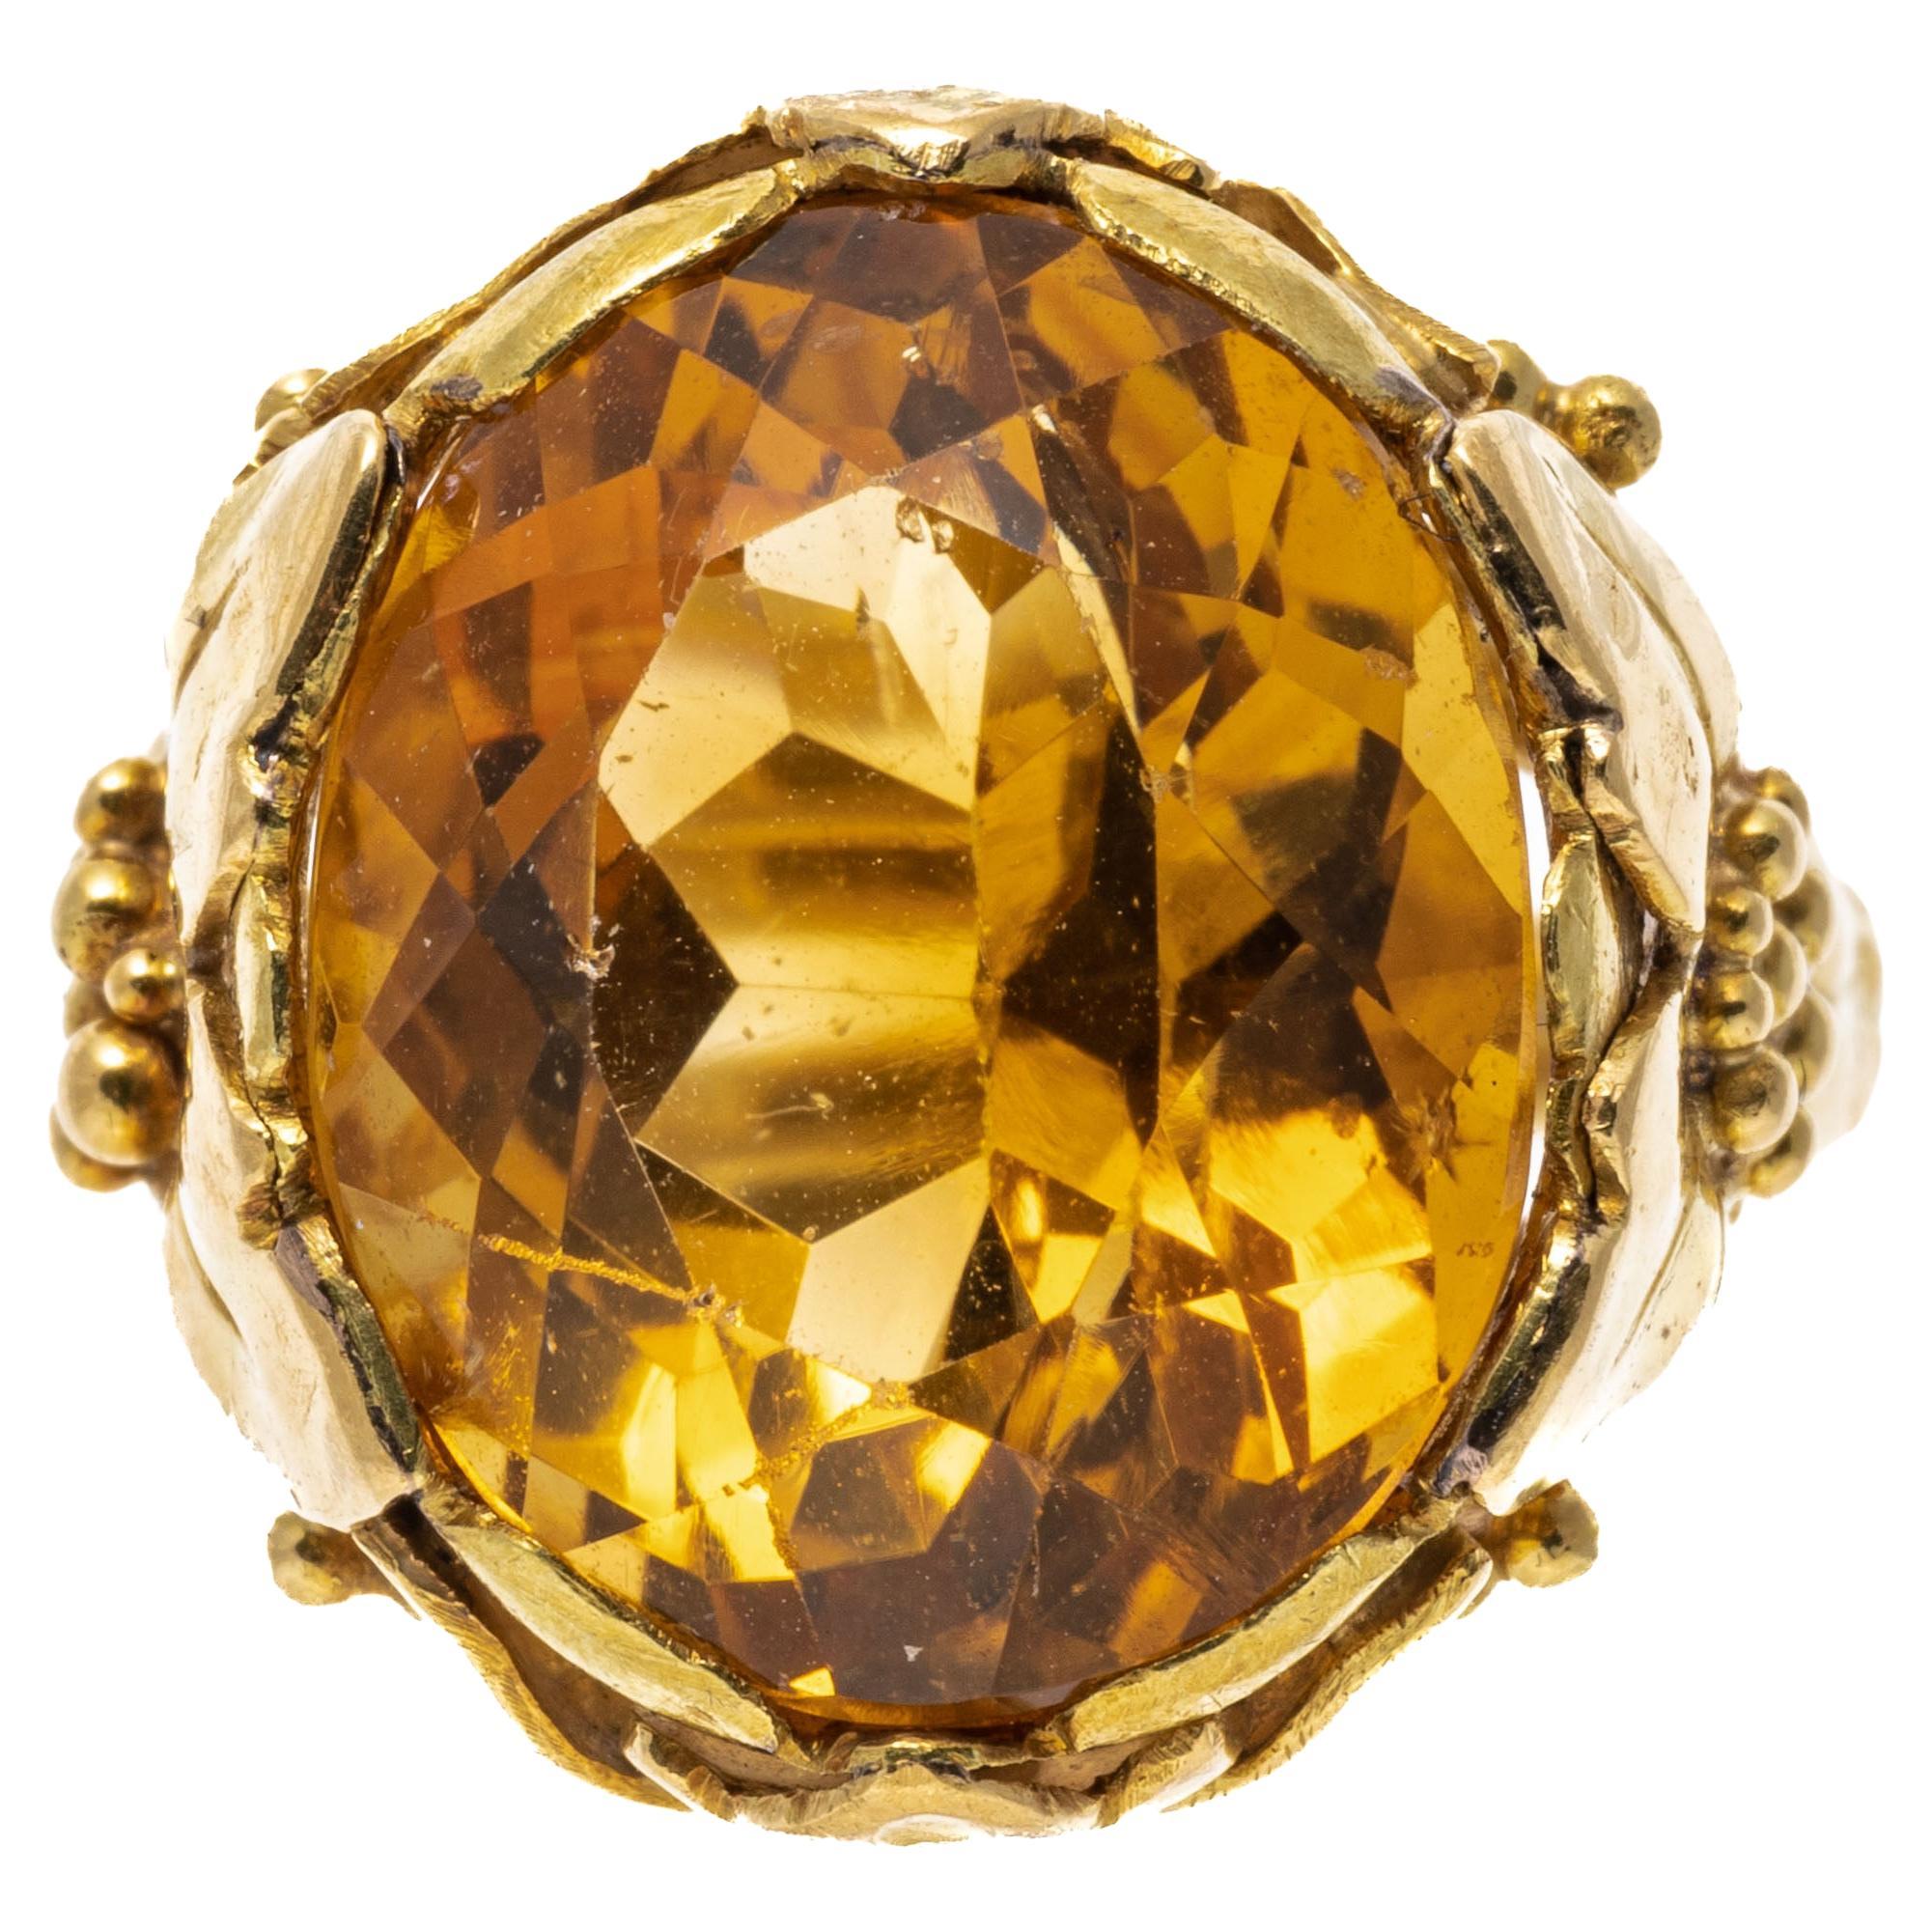 14k Yellow Gold Oval Citrine 'App. 8.84 Cts' and Flower Form Ring